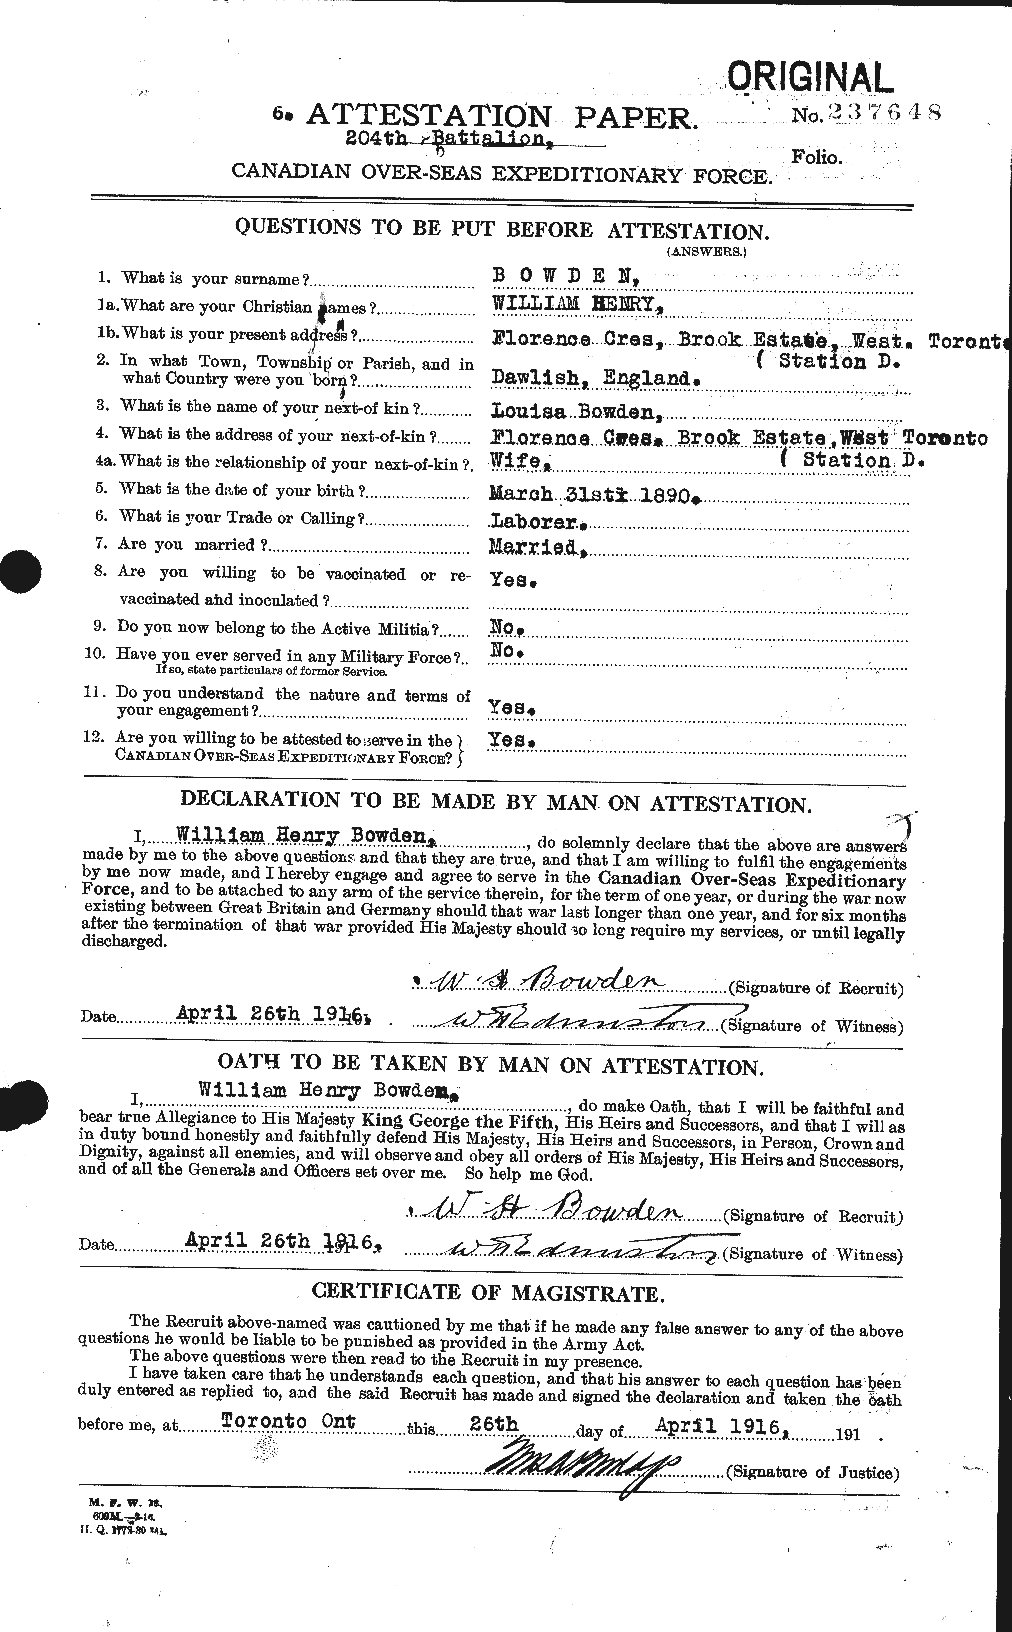 Personnel Records of the First World War - CEF 255300a